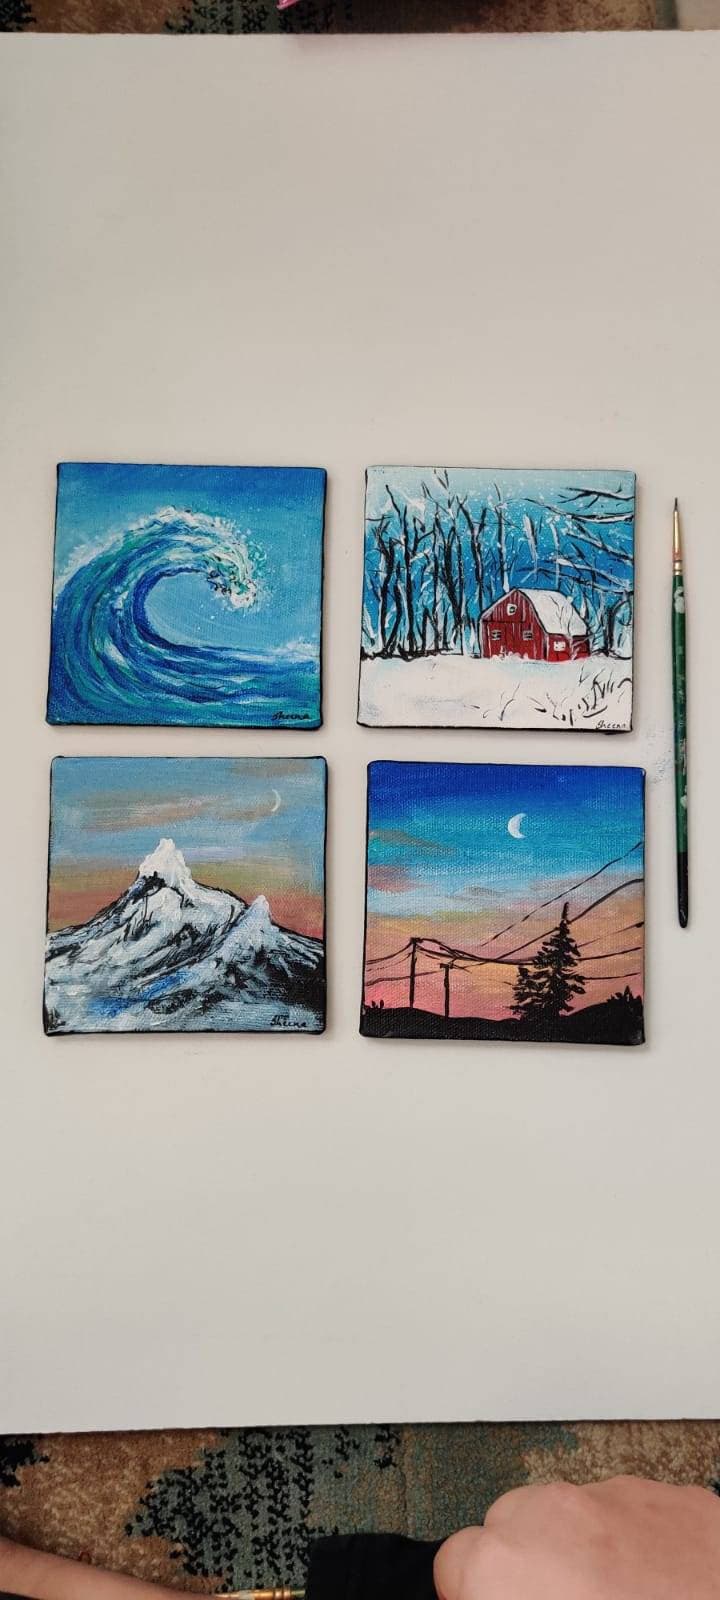 Small Canvas Painting, Original Acrylic/mixed Media Paintings on Canvas  Board/ Stretched Canvas/ Miniature Painting/ Original Artwork/ Gift 